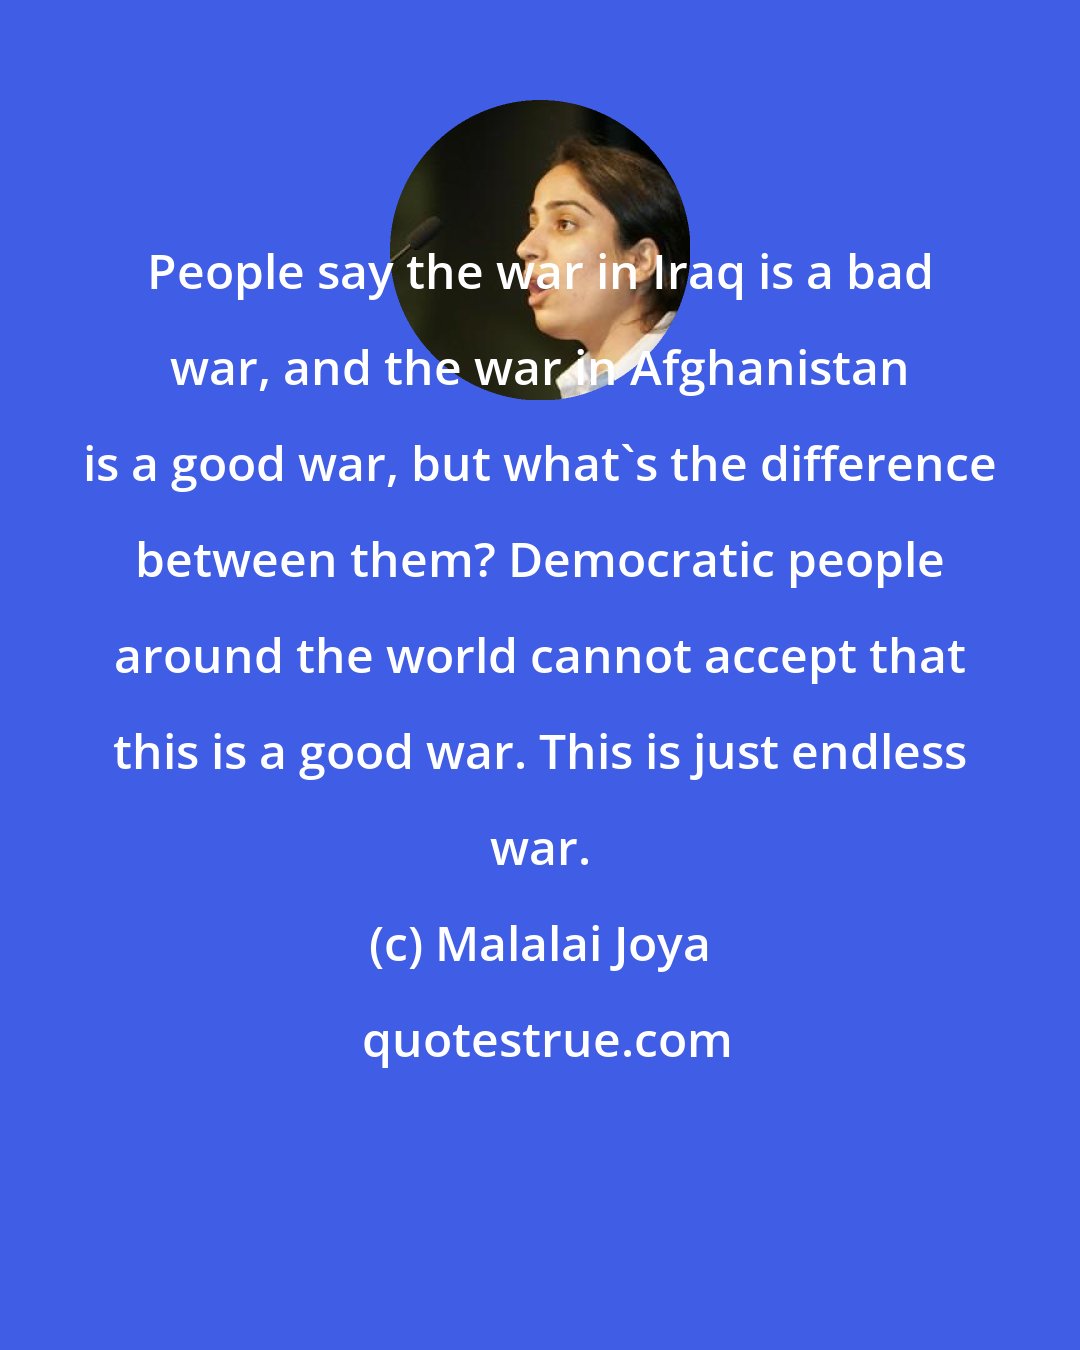 Malalai Joya: People say the war in Iraq is a bad war, and the war in Afghanistan is a good war, but what's the difference between them? Democratic people around the world cannot accept that this is a good war. This is just endless war.